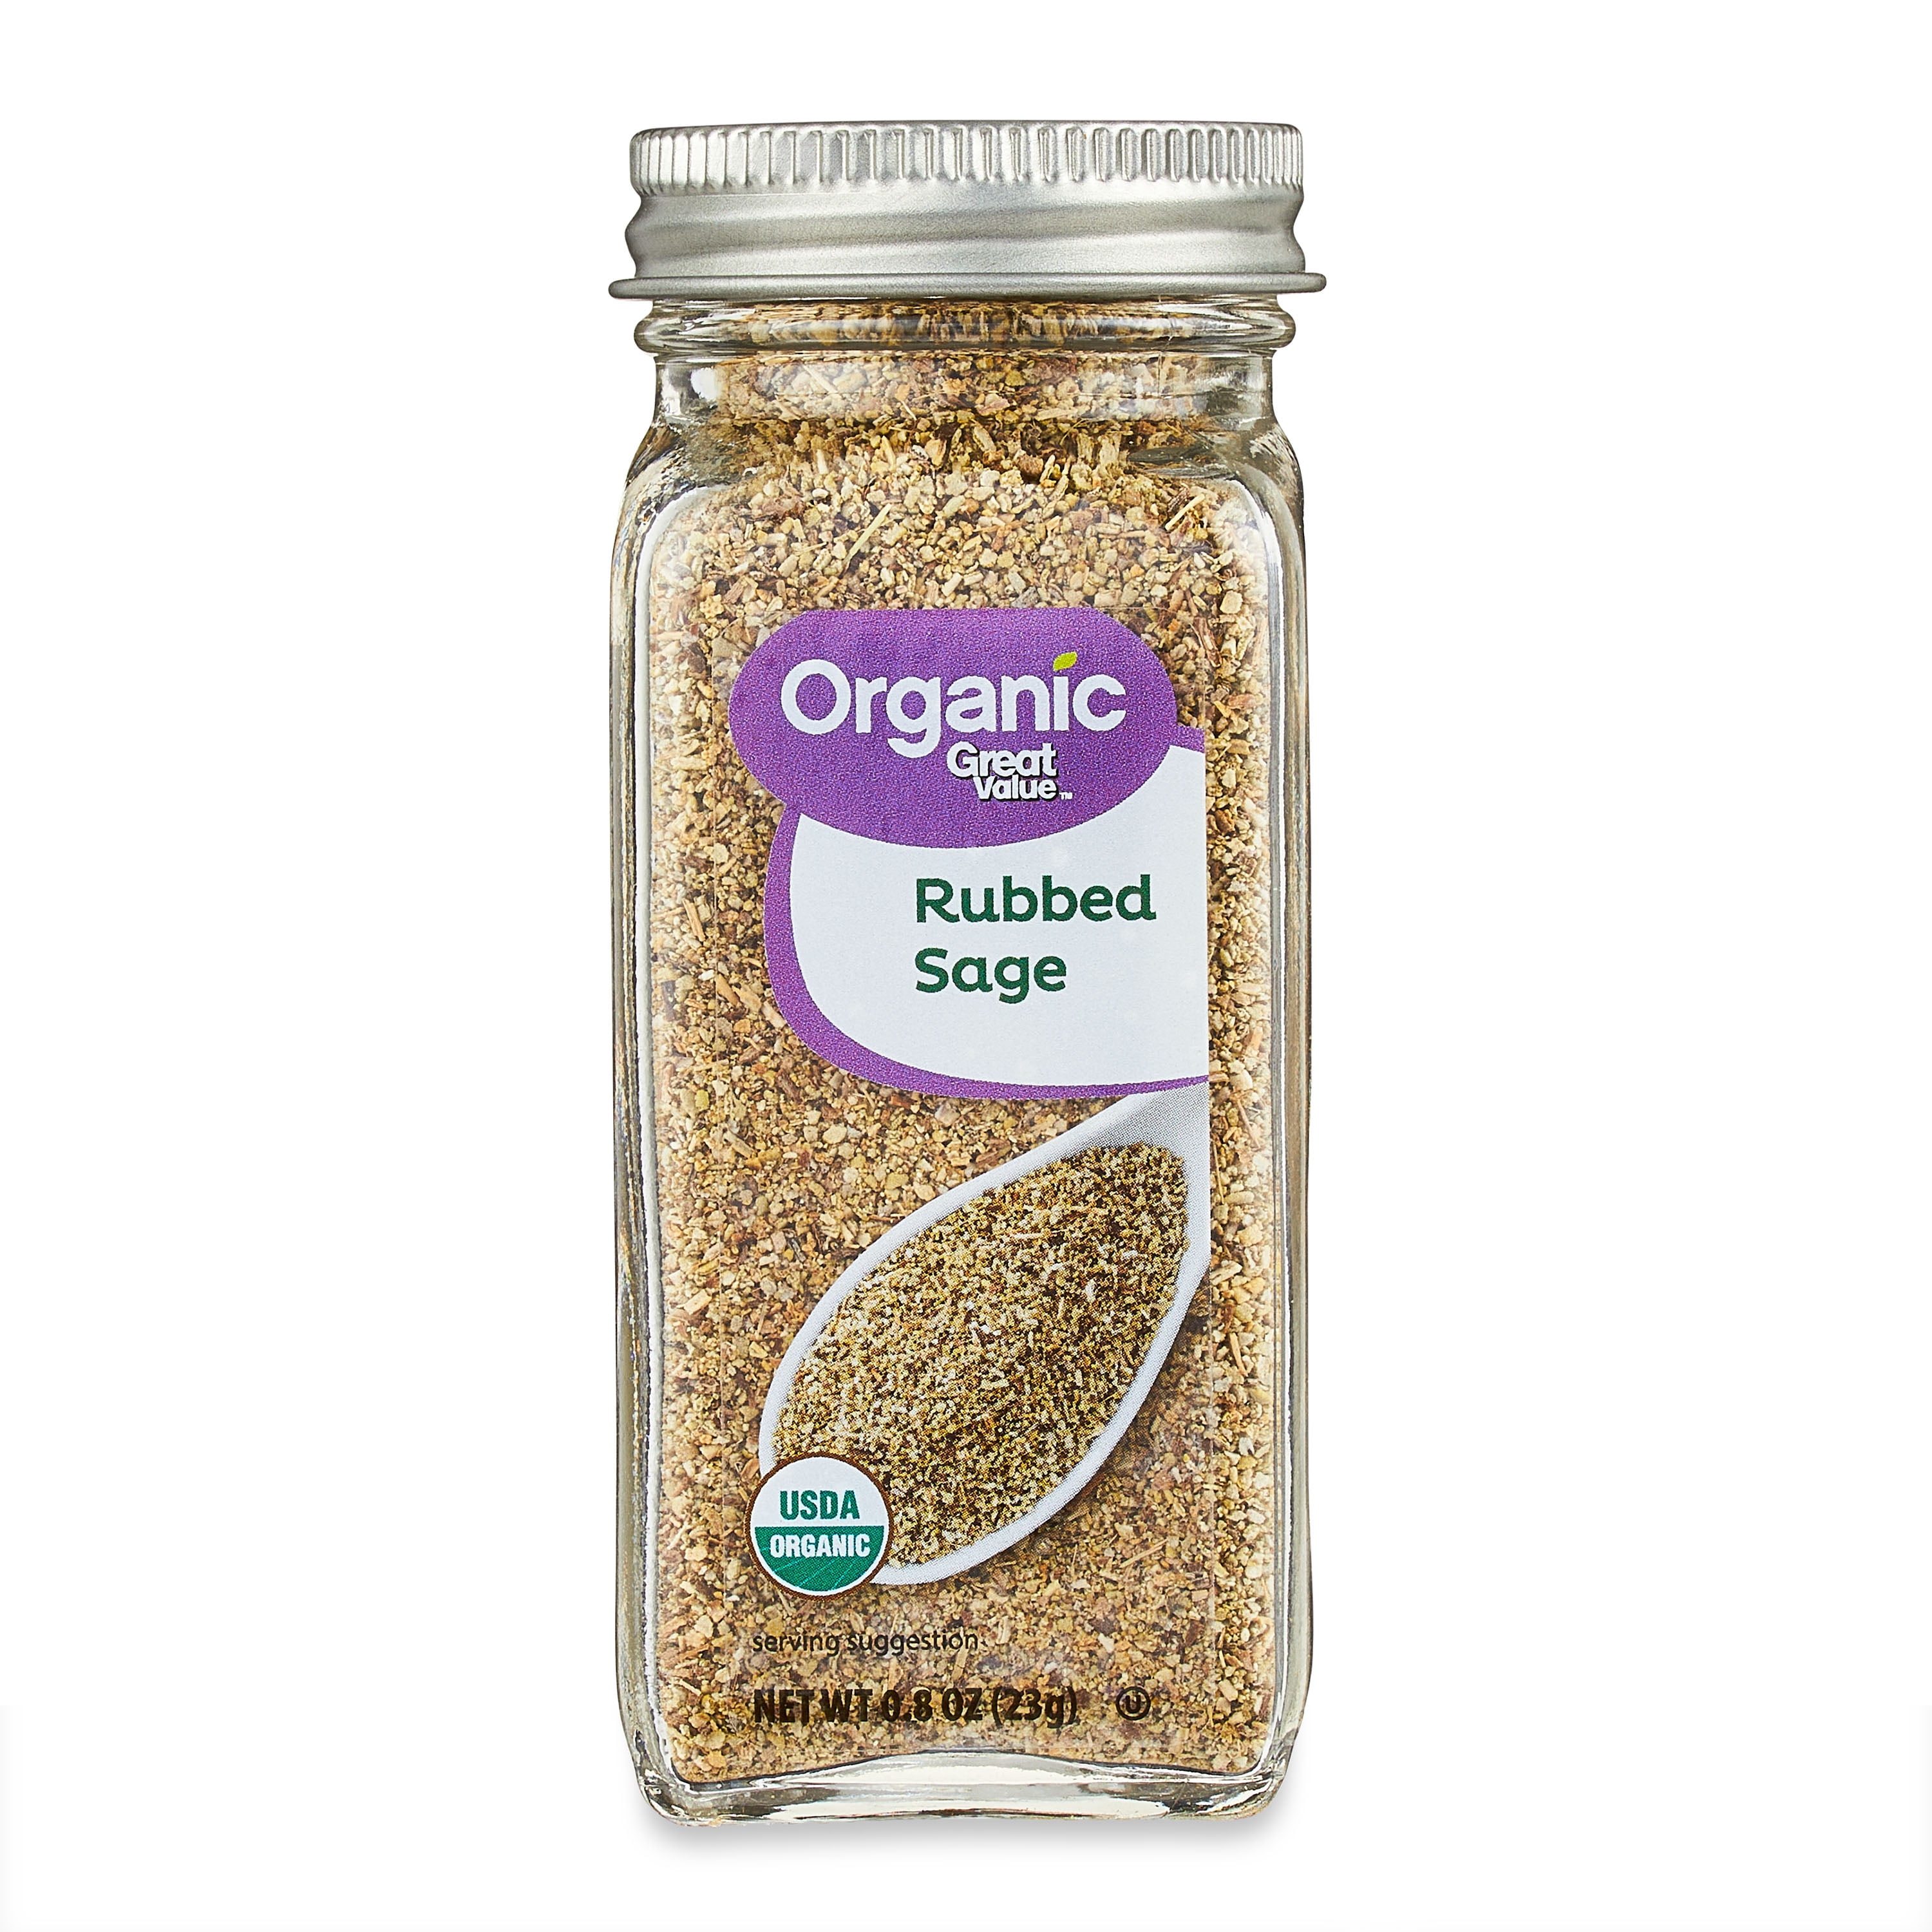 Great Value Organic Rubbed Sage, 0.8 oz